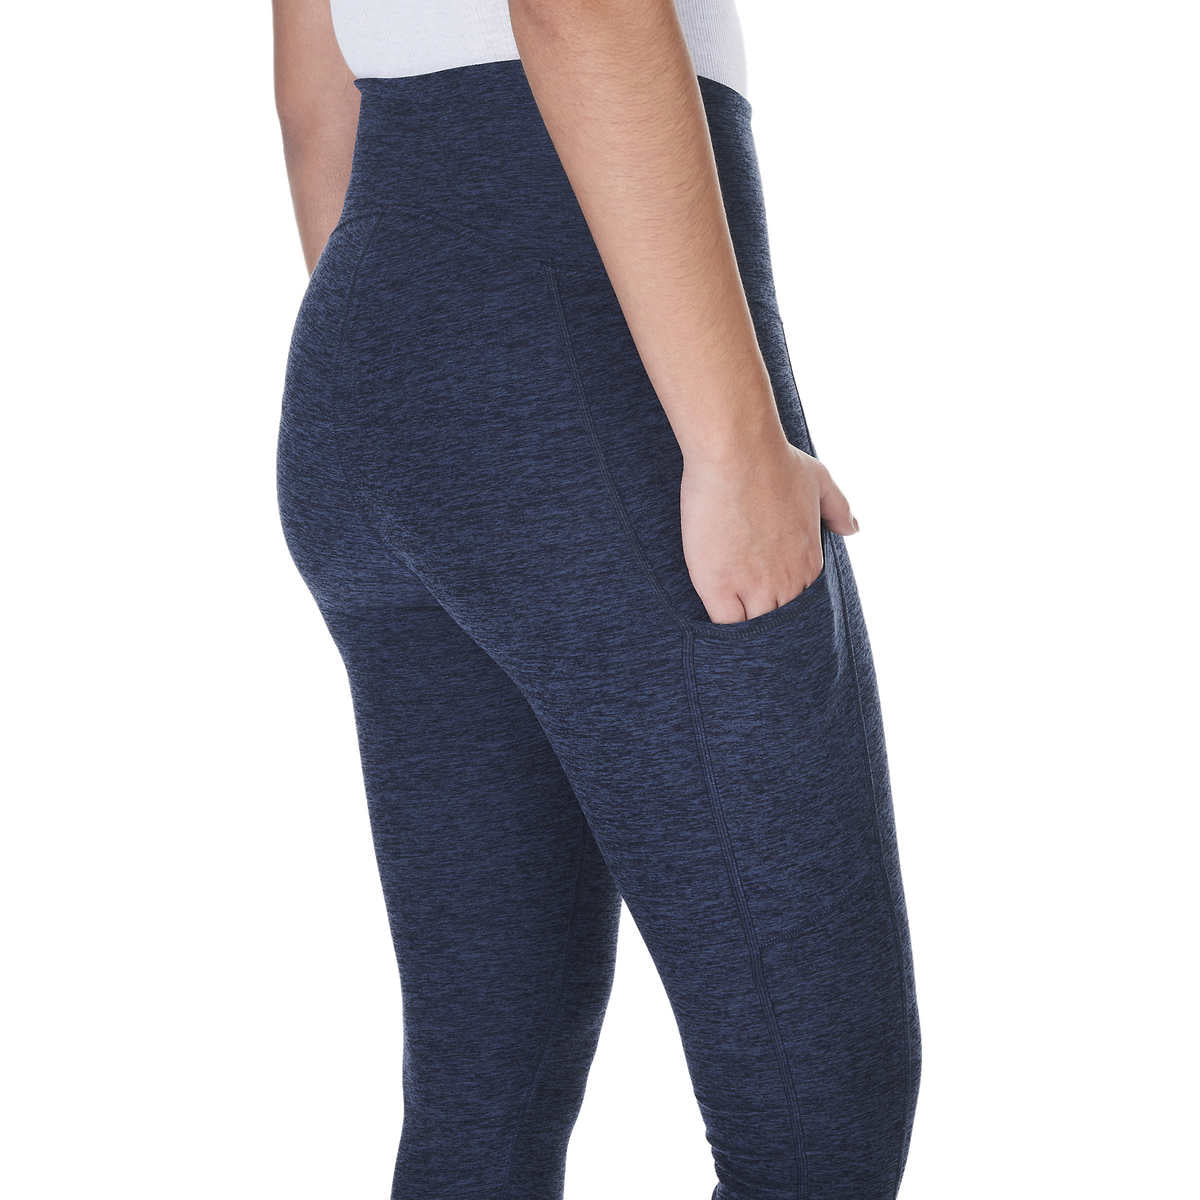 Kirkland Signature ladies brushed leggings with pockets are $3 off through  the 29th! This is such a good price! 🤩